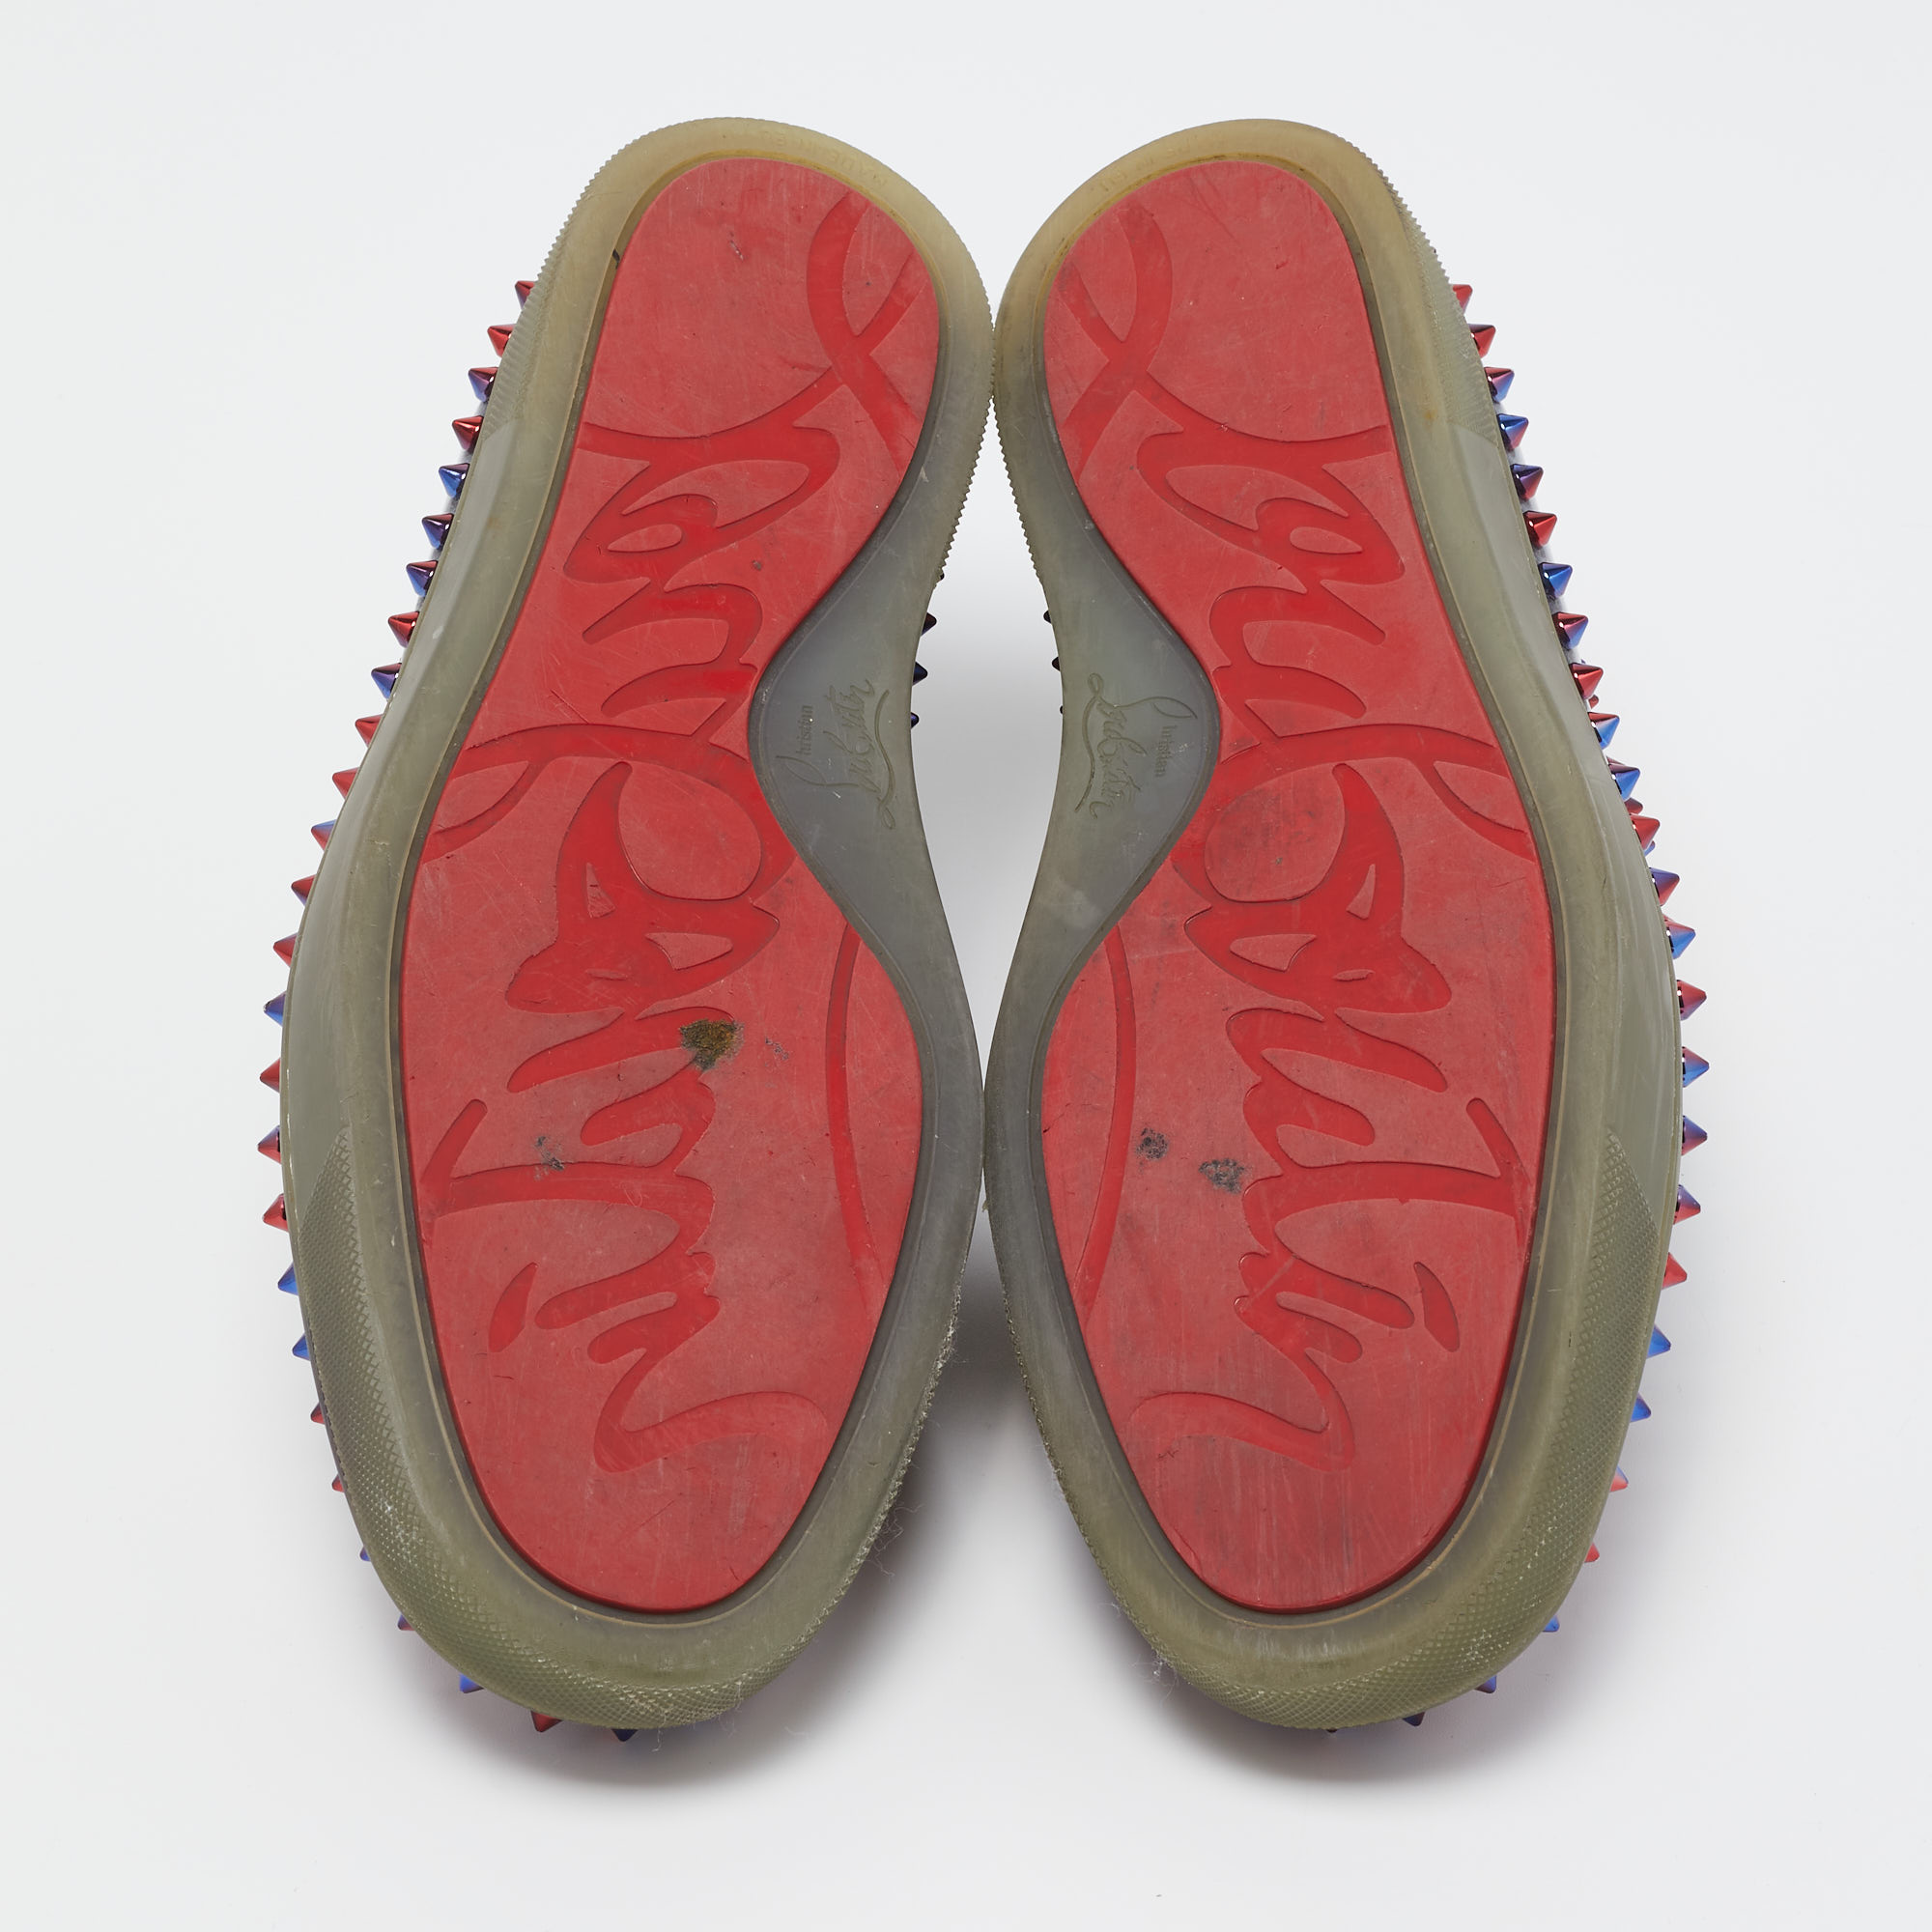 Christian Louboutin Multicolor Glitter Patent Leather Spike Pik Boat Slip On Sneakers Size 42.5